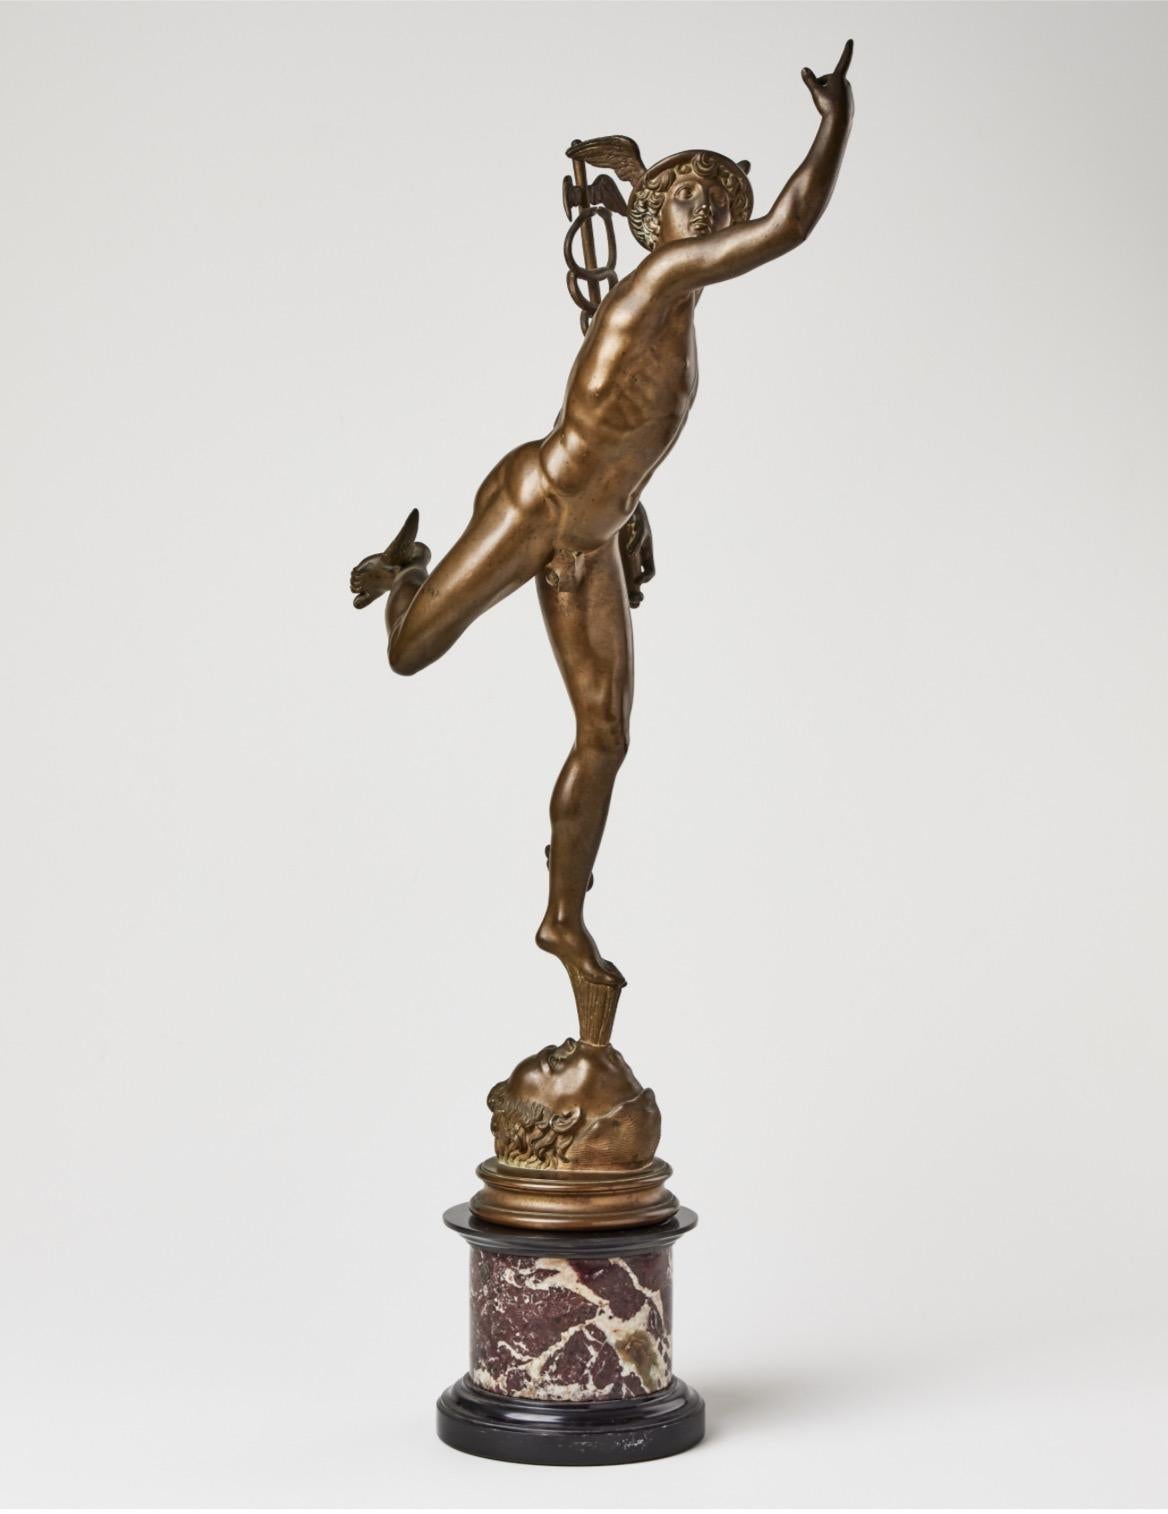 Patinated 19th Century Grand Tour Mercury Bronze Sculpture after Giambologna by Benedetto 